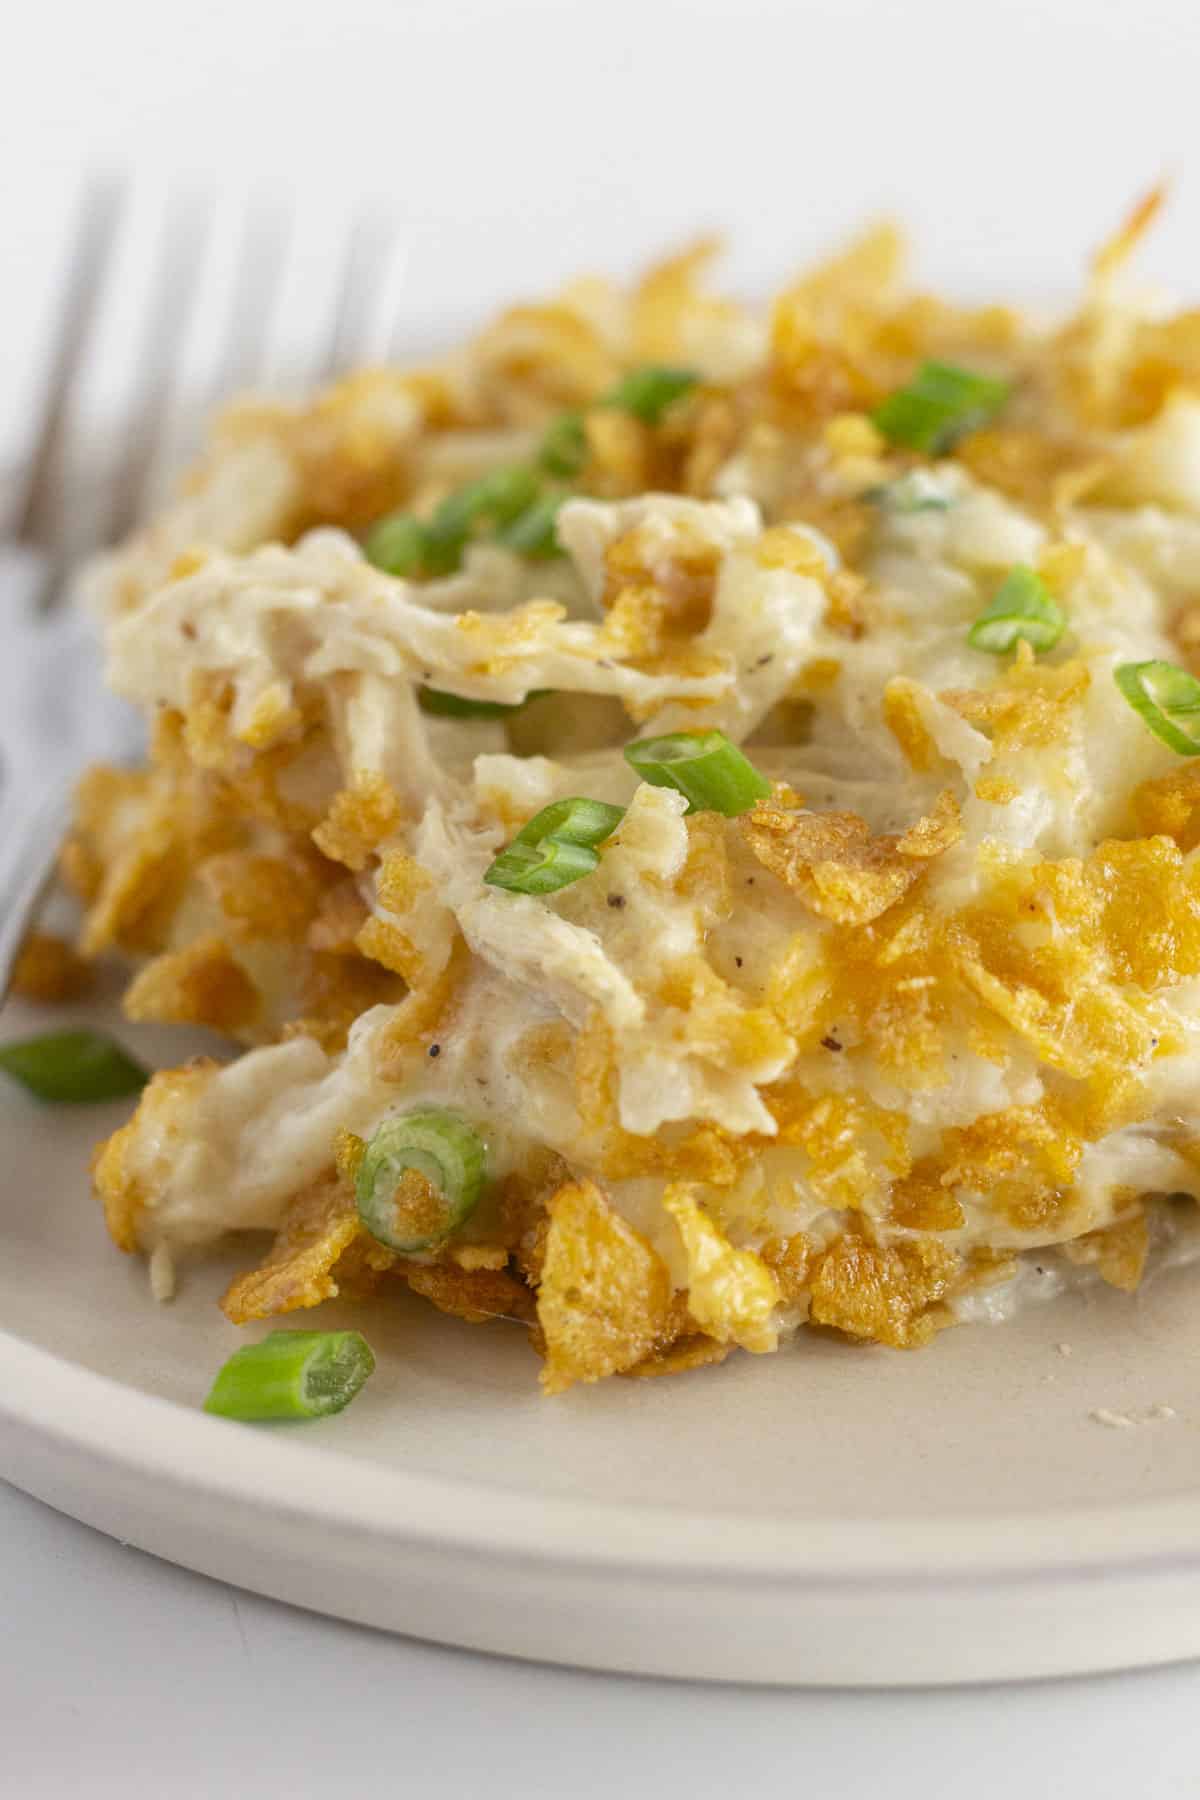 A serving of chicken and hashbrown casserole.